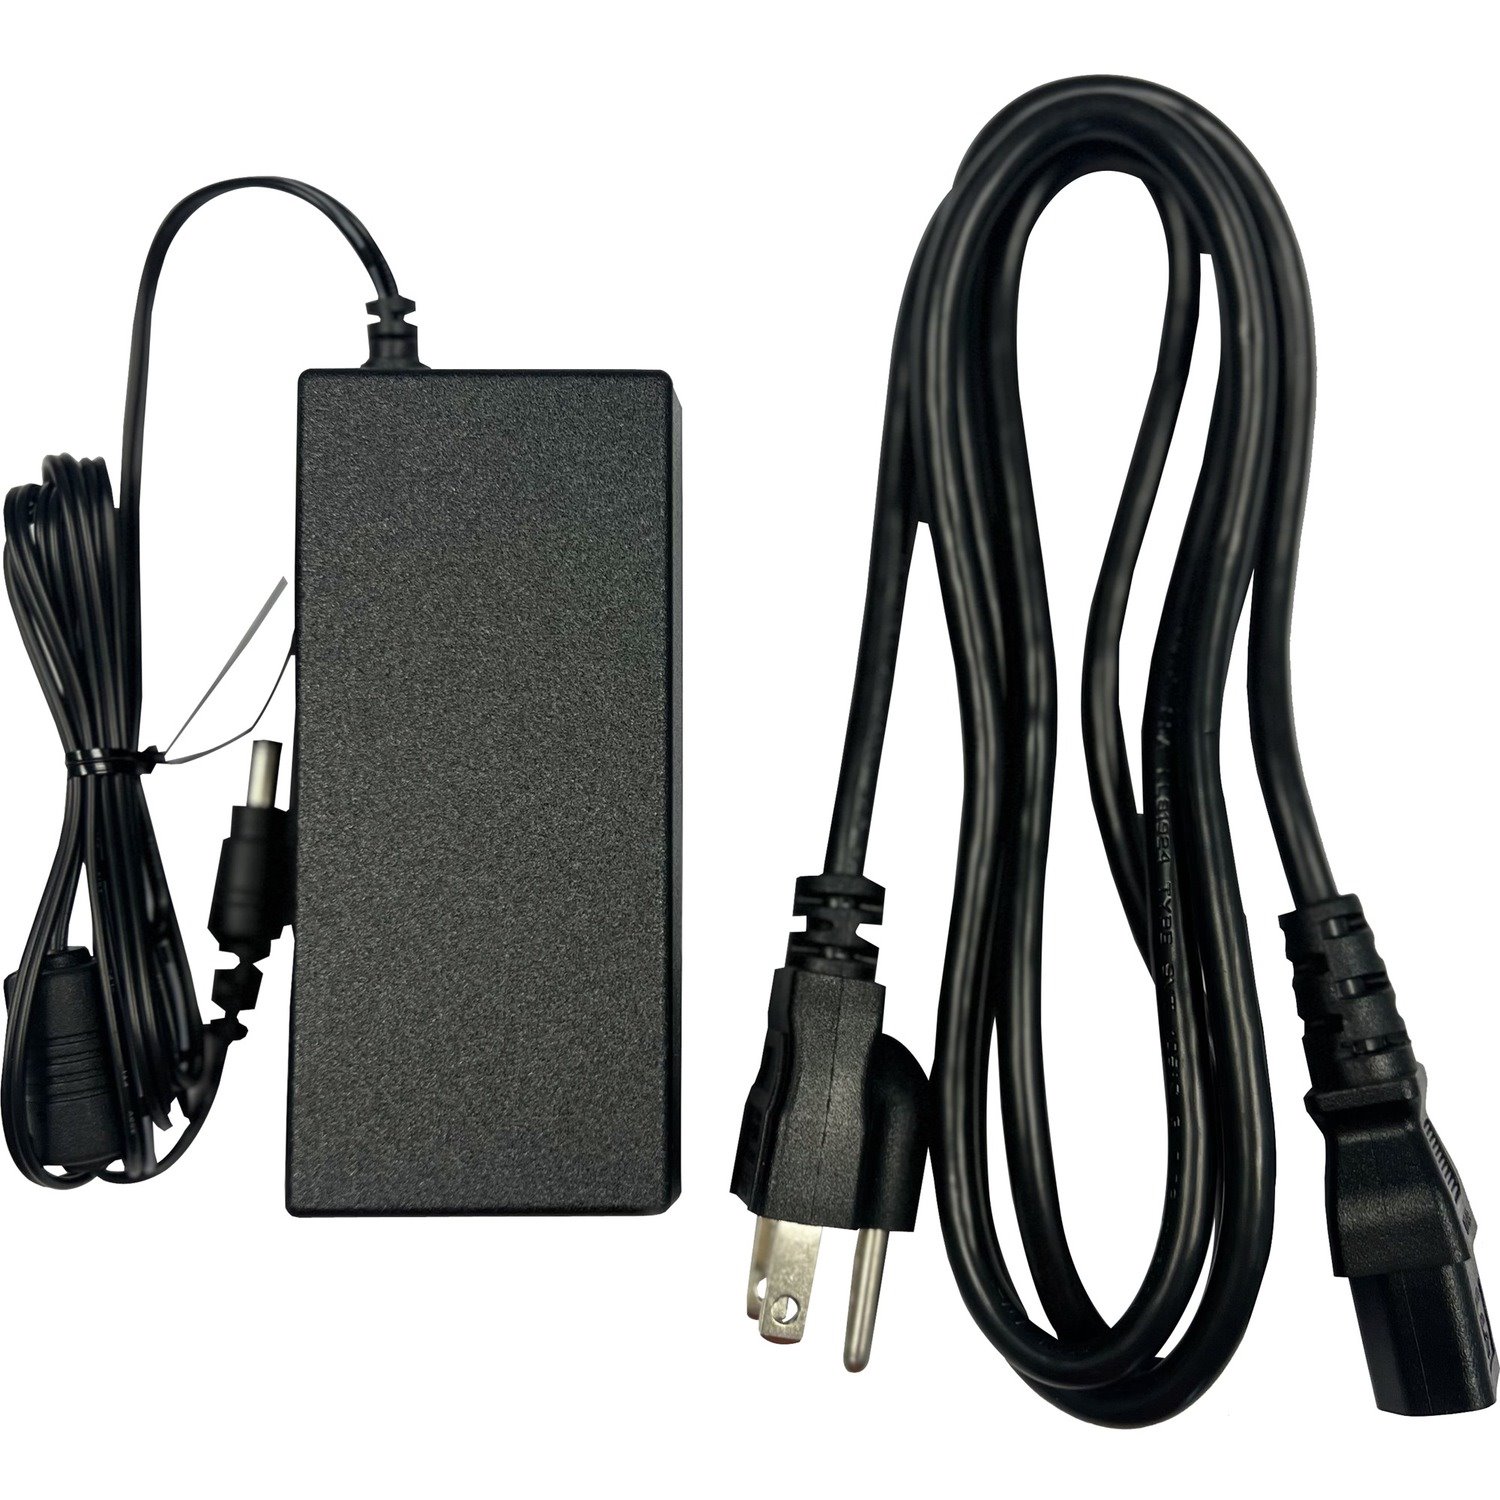 Datto DC Adapter